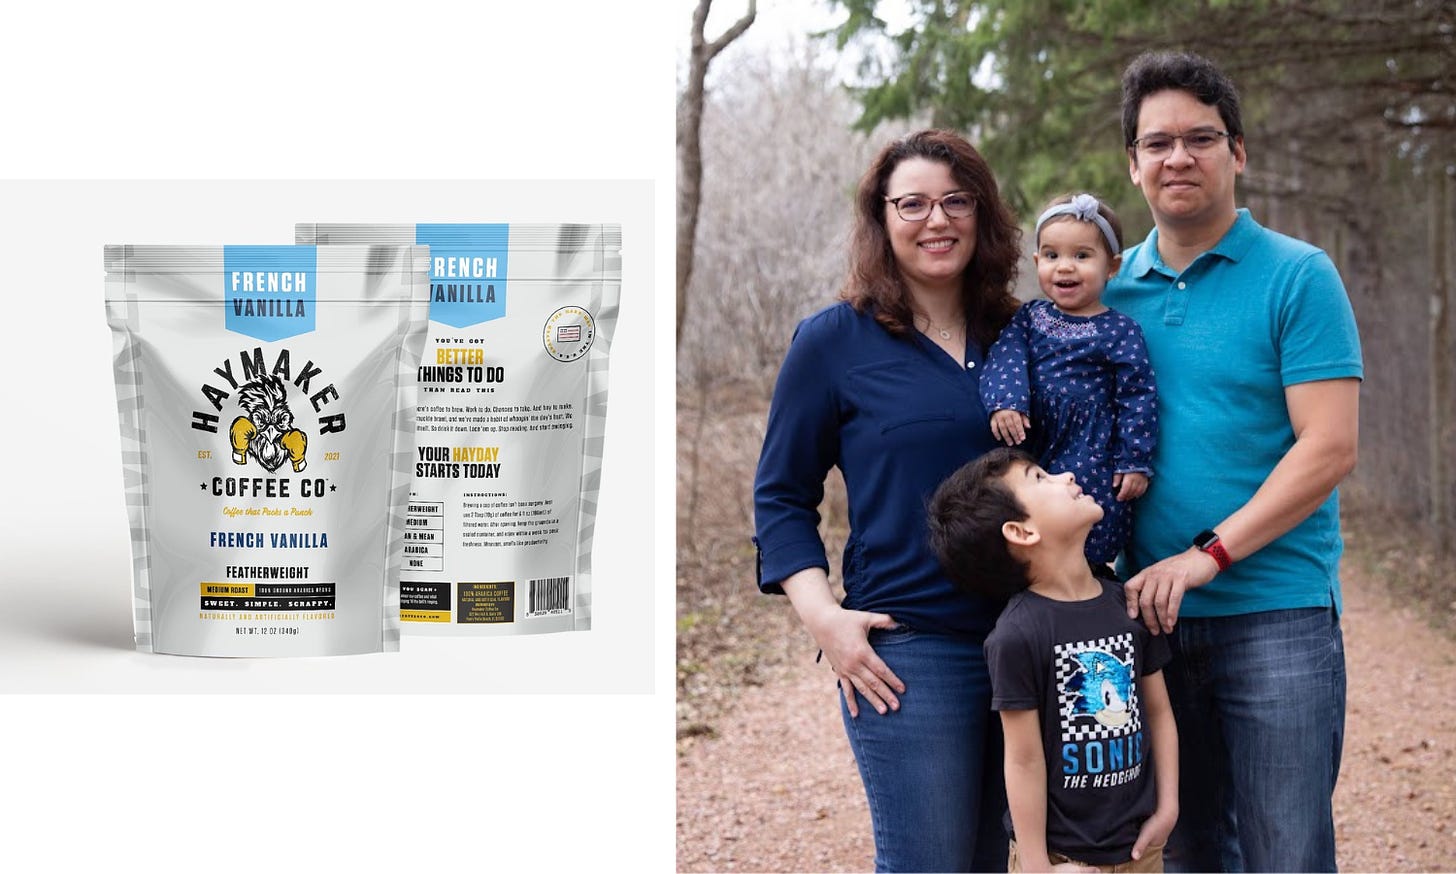 On the left: A Haymaker Coffee Co. bag. On right, a family poses on the trails in the woods. Mom on the left, Dad on the right holding a baby in between them, and a young son looking up and smiling.